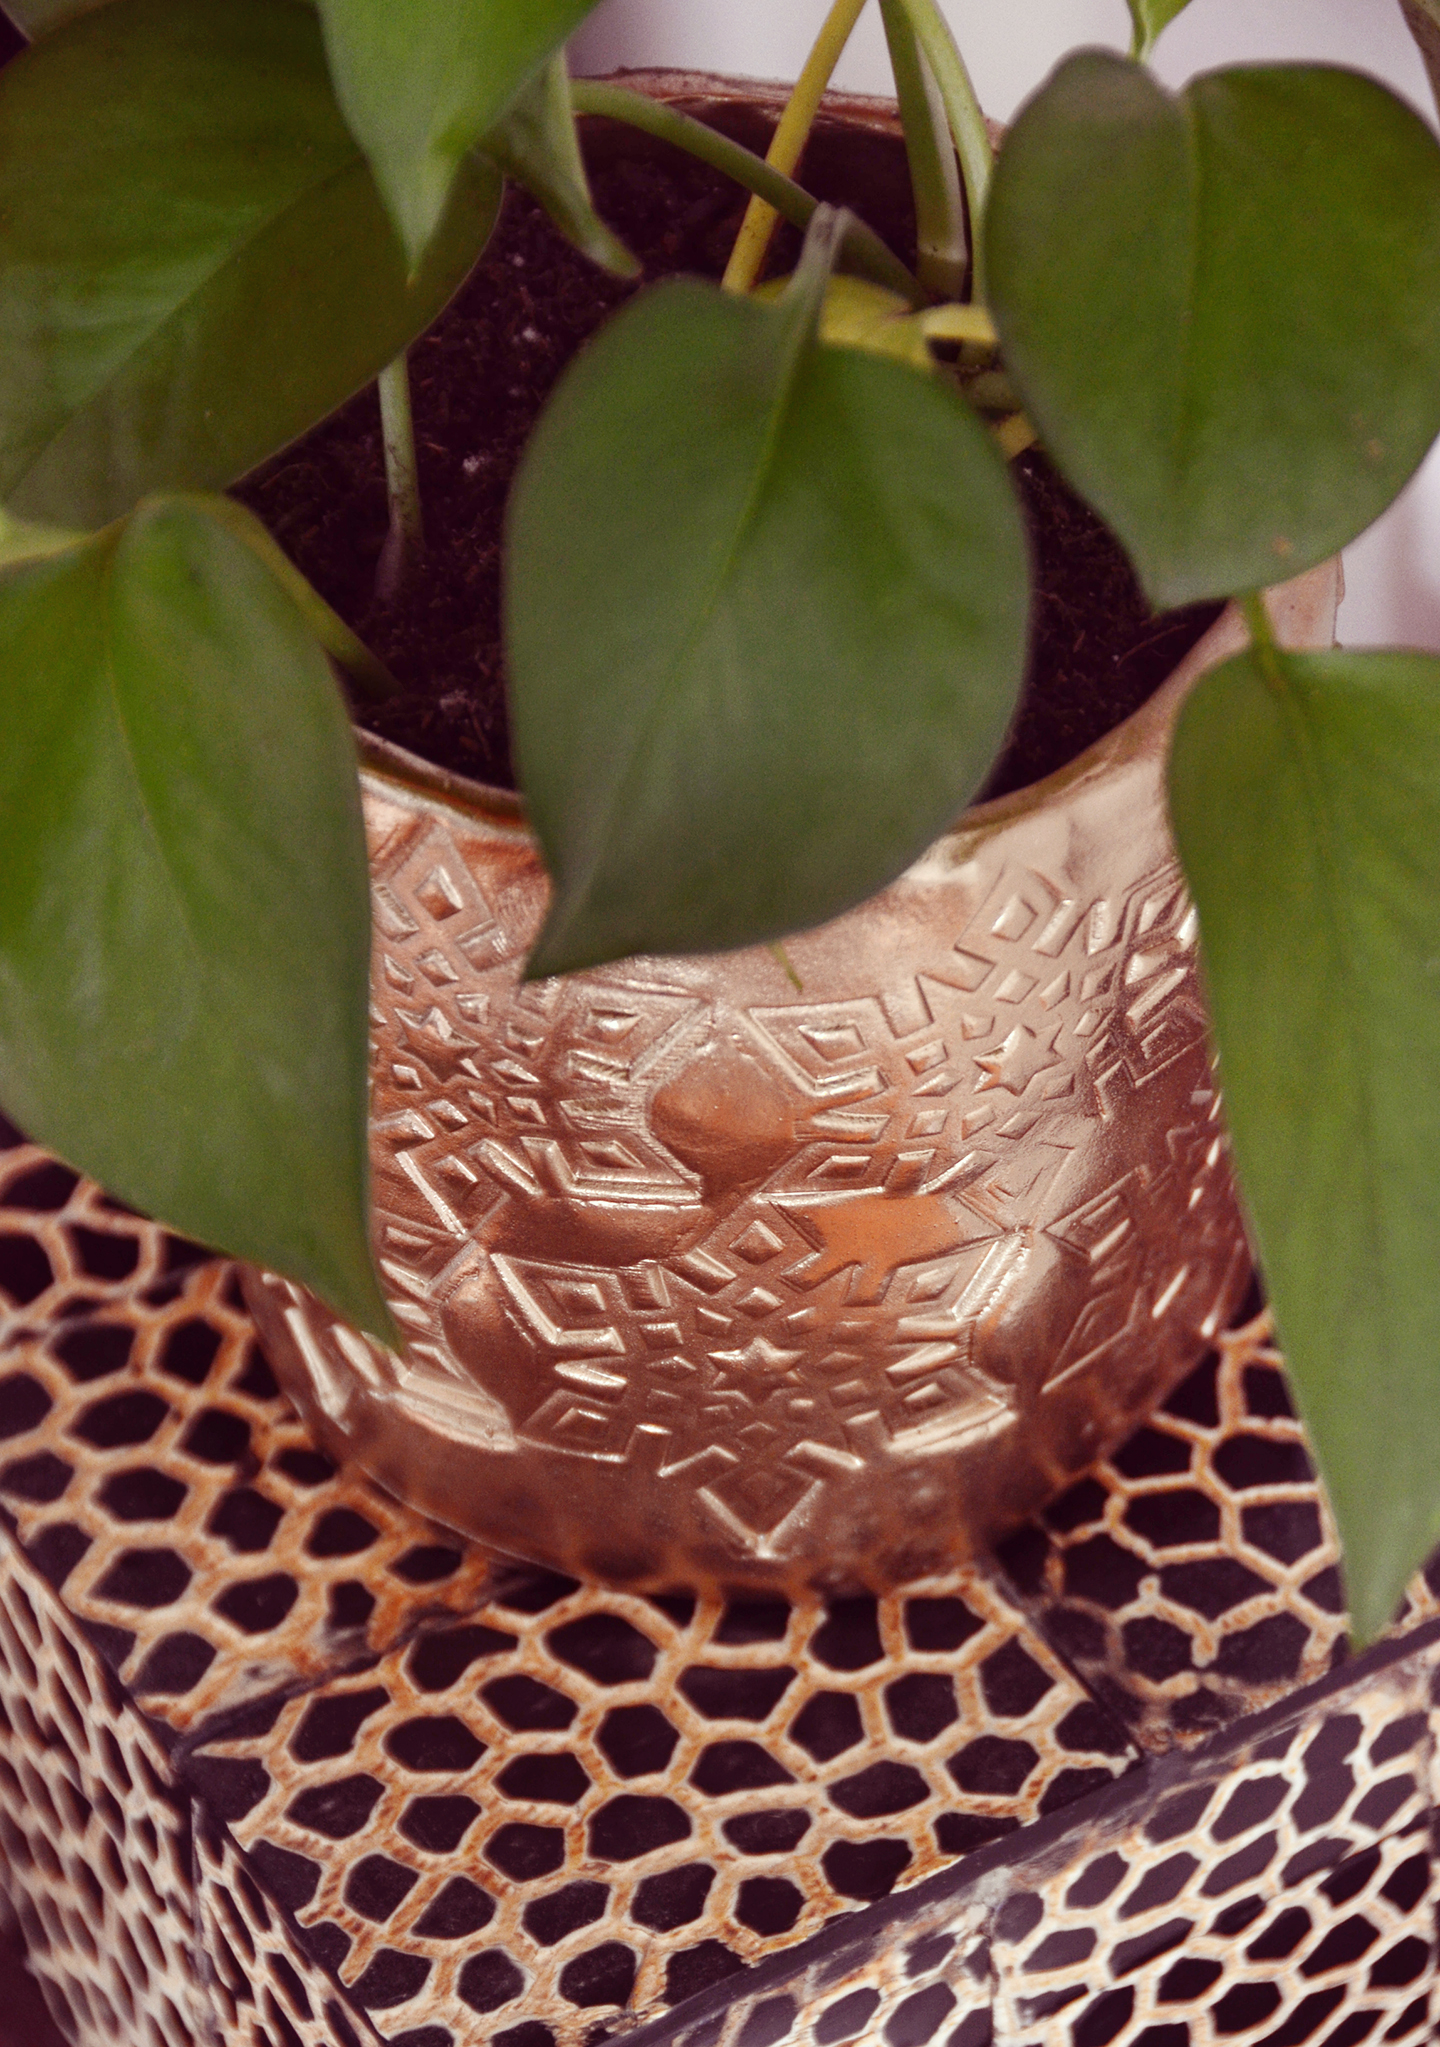 Easy DIY Rubber Stamped Clay Planter /// By Design Fixation #diy #rubberstamps #clay #planter